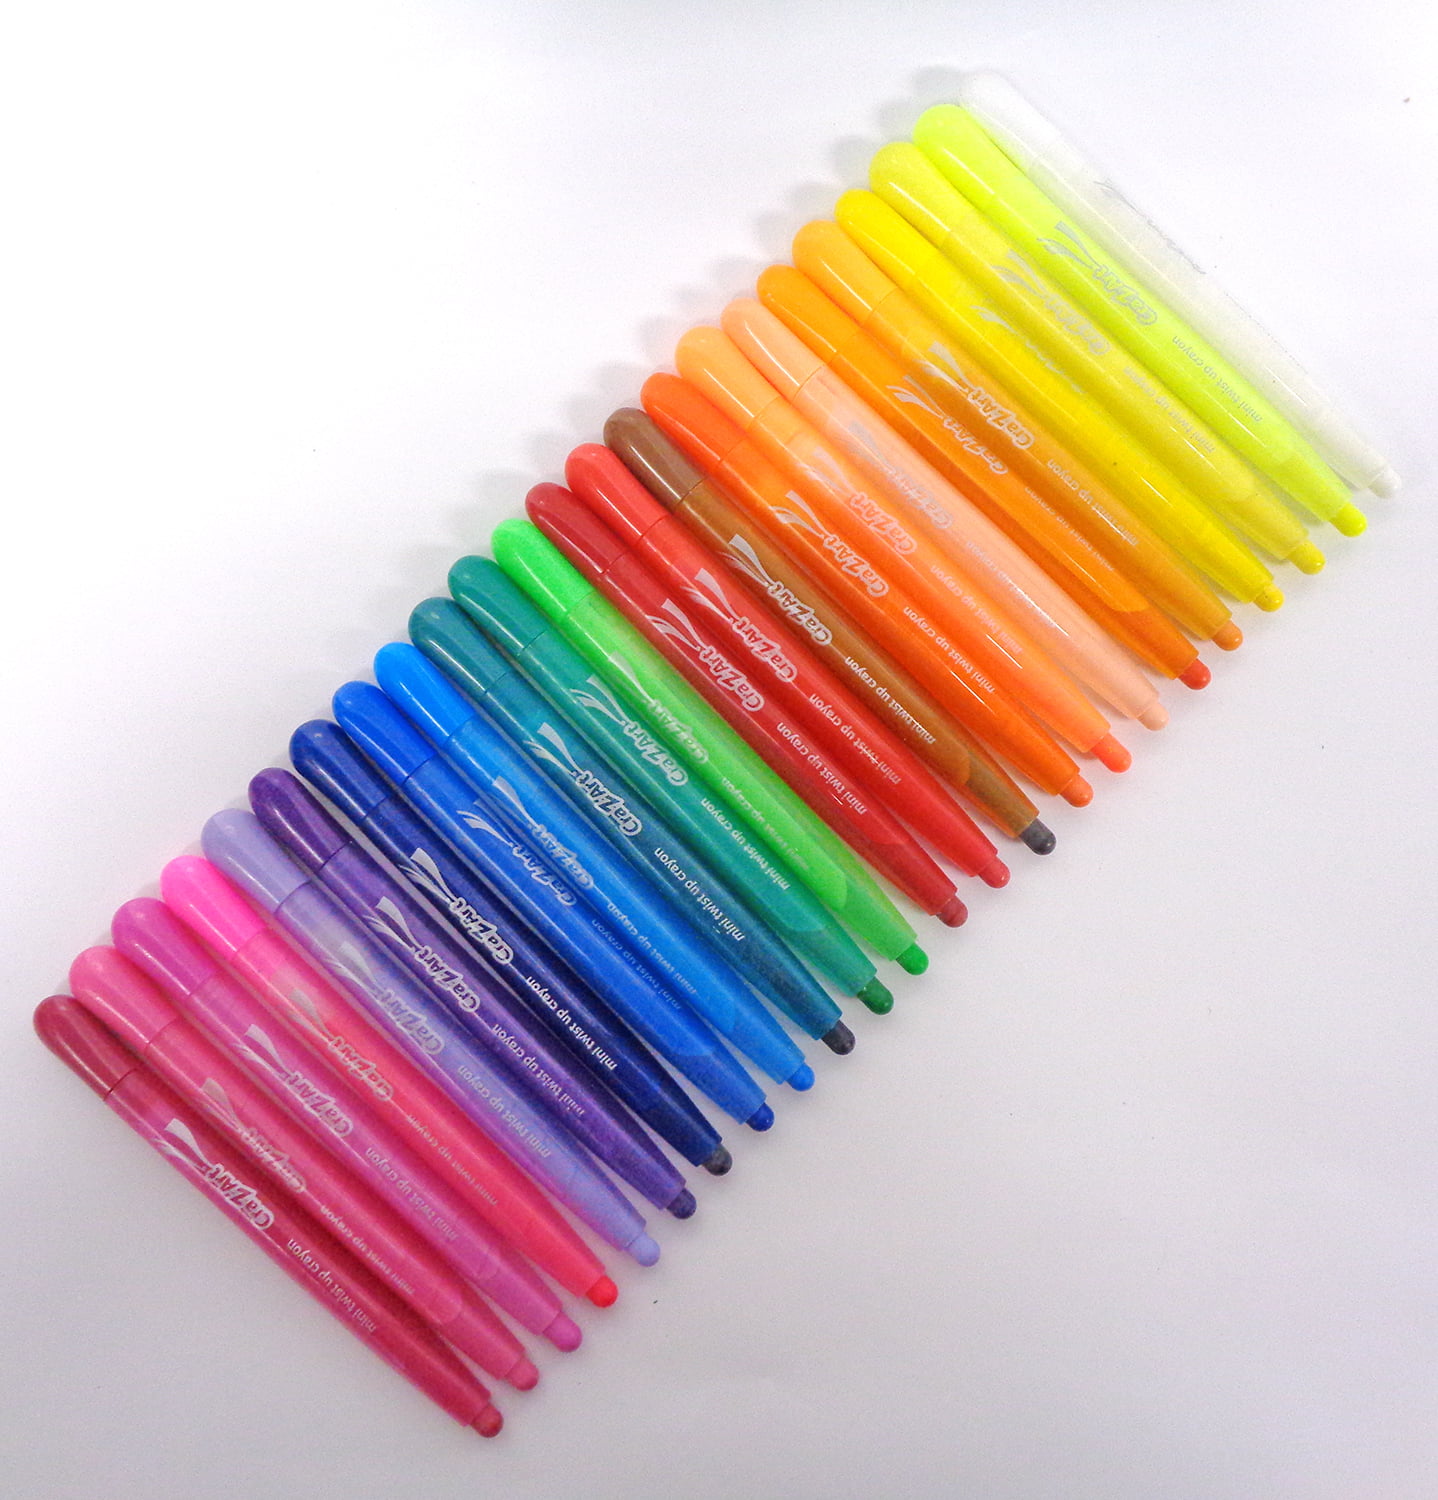 Cra-Z-Art Quality Scented Twist Crayons - Dream Products